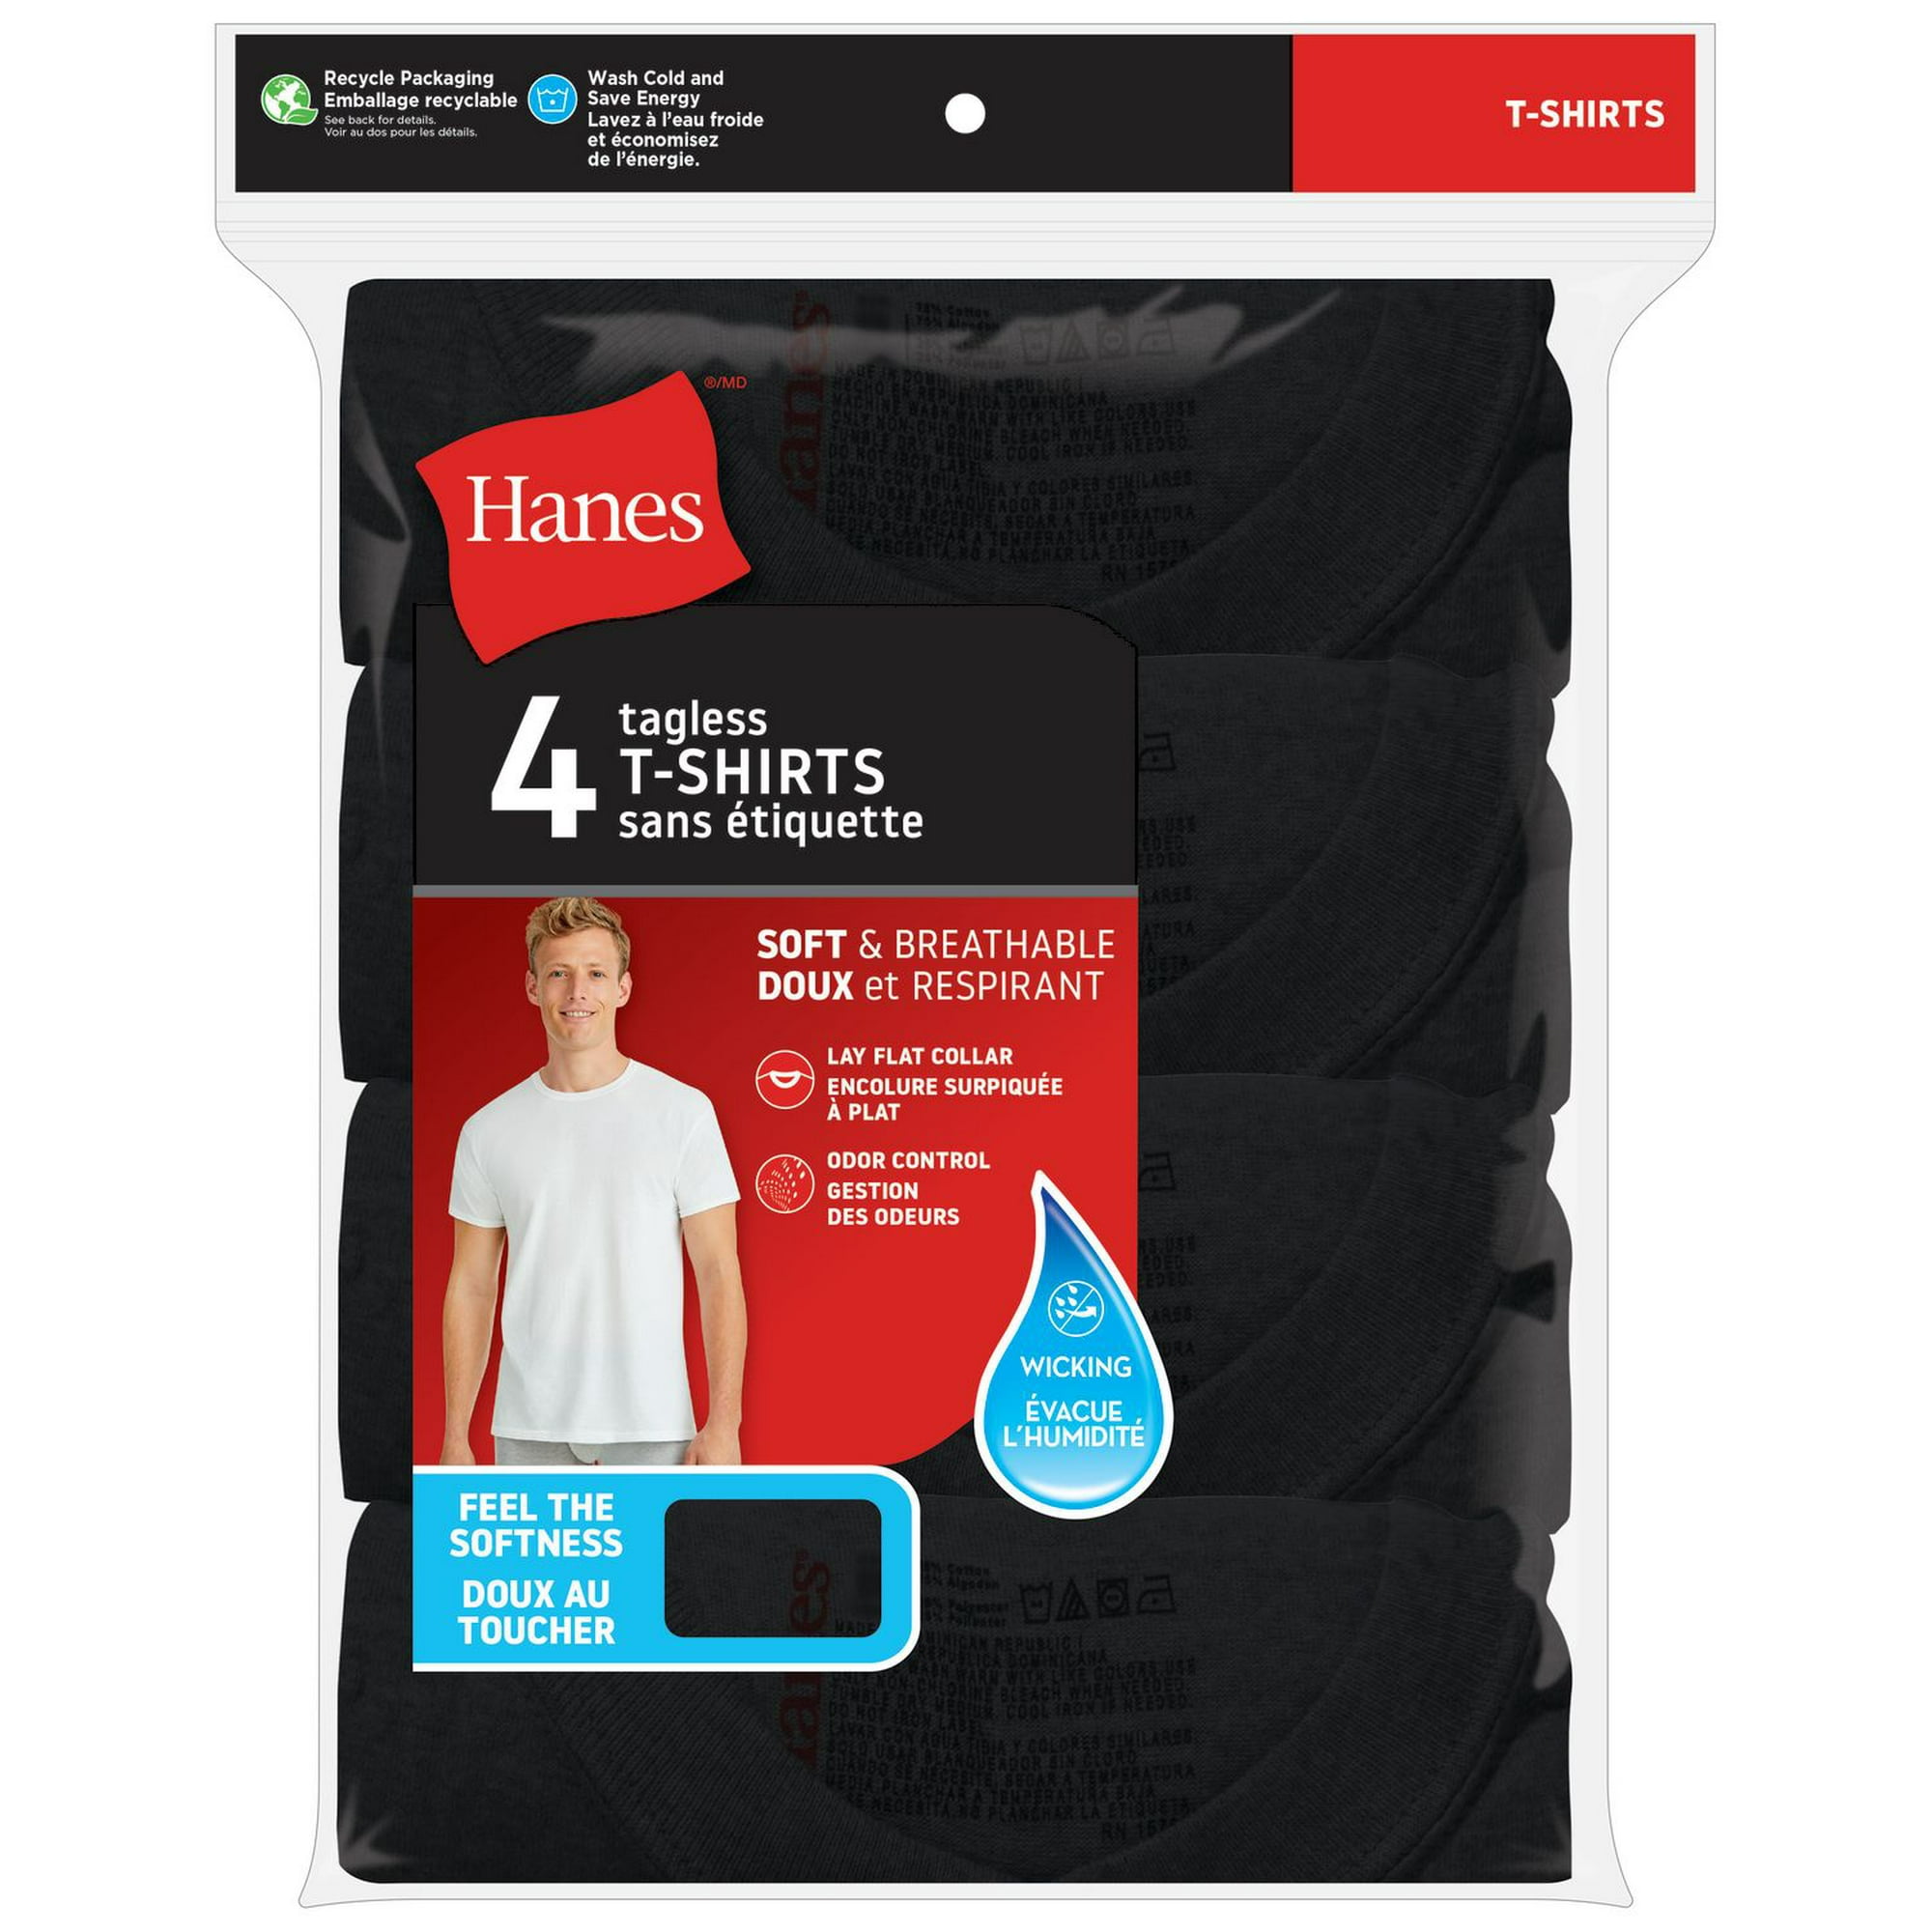 Hanes Her Way for Teens, Hanes stopped making these a few y…